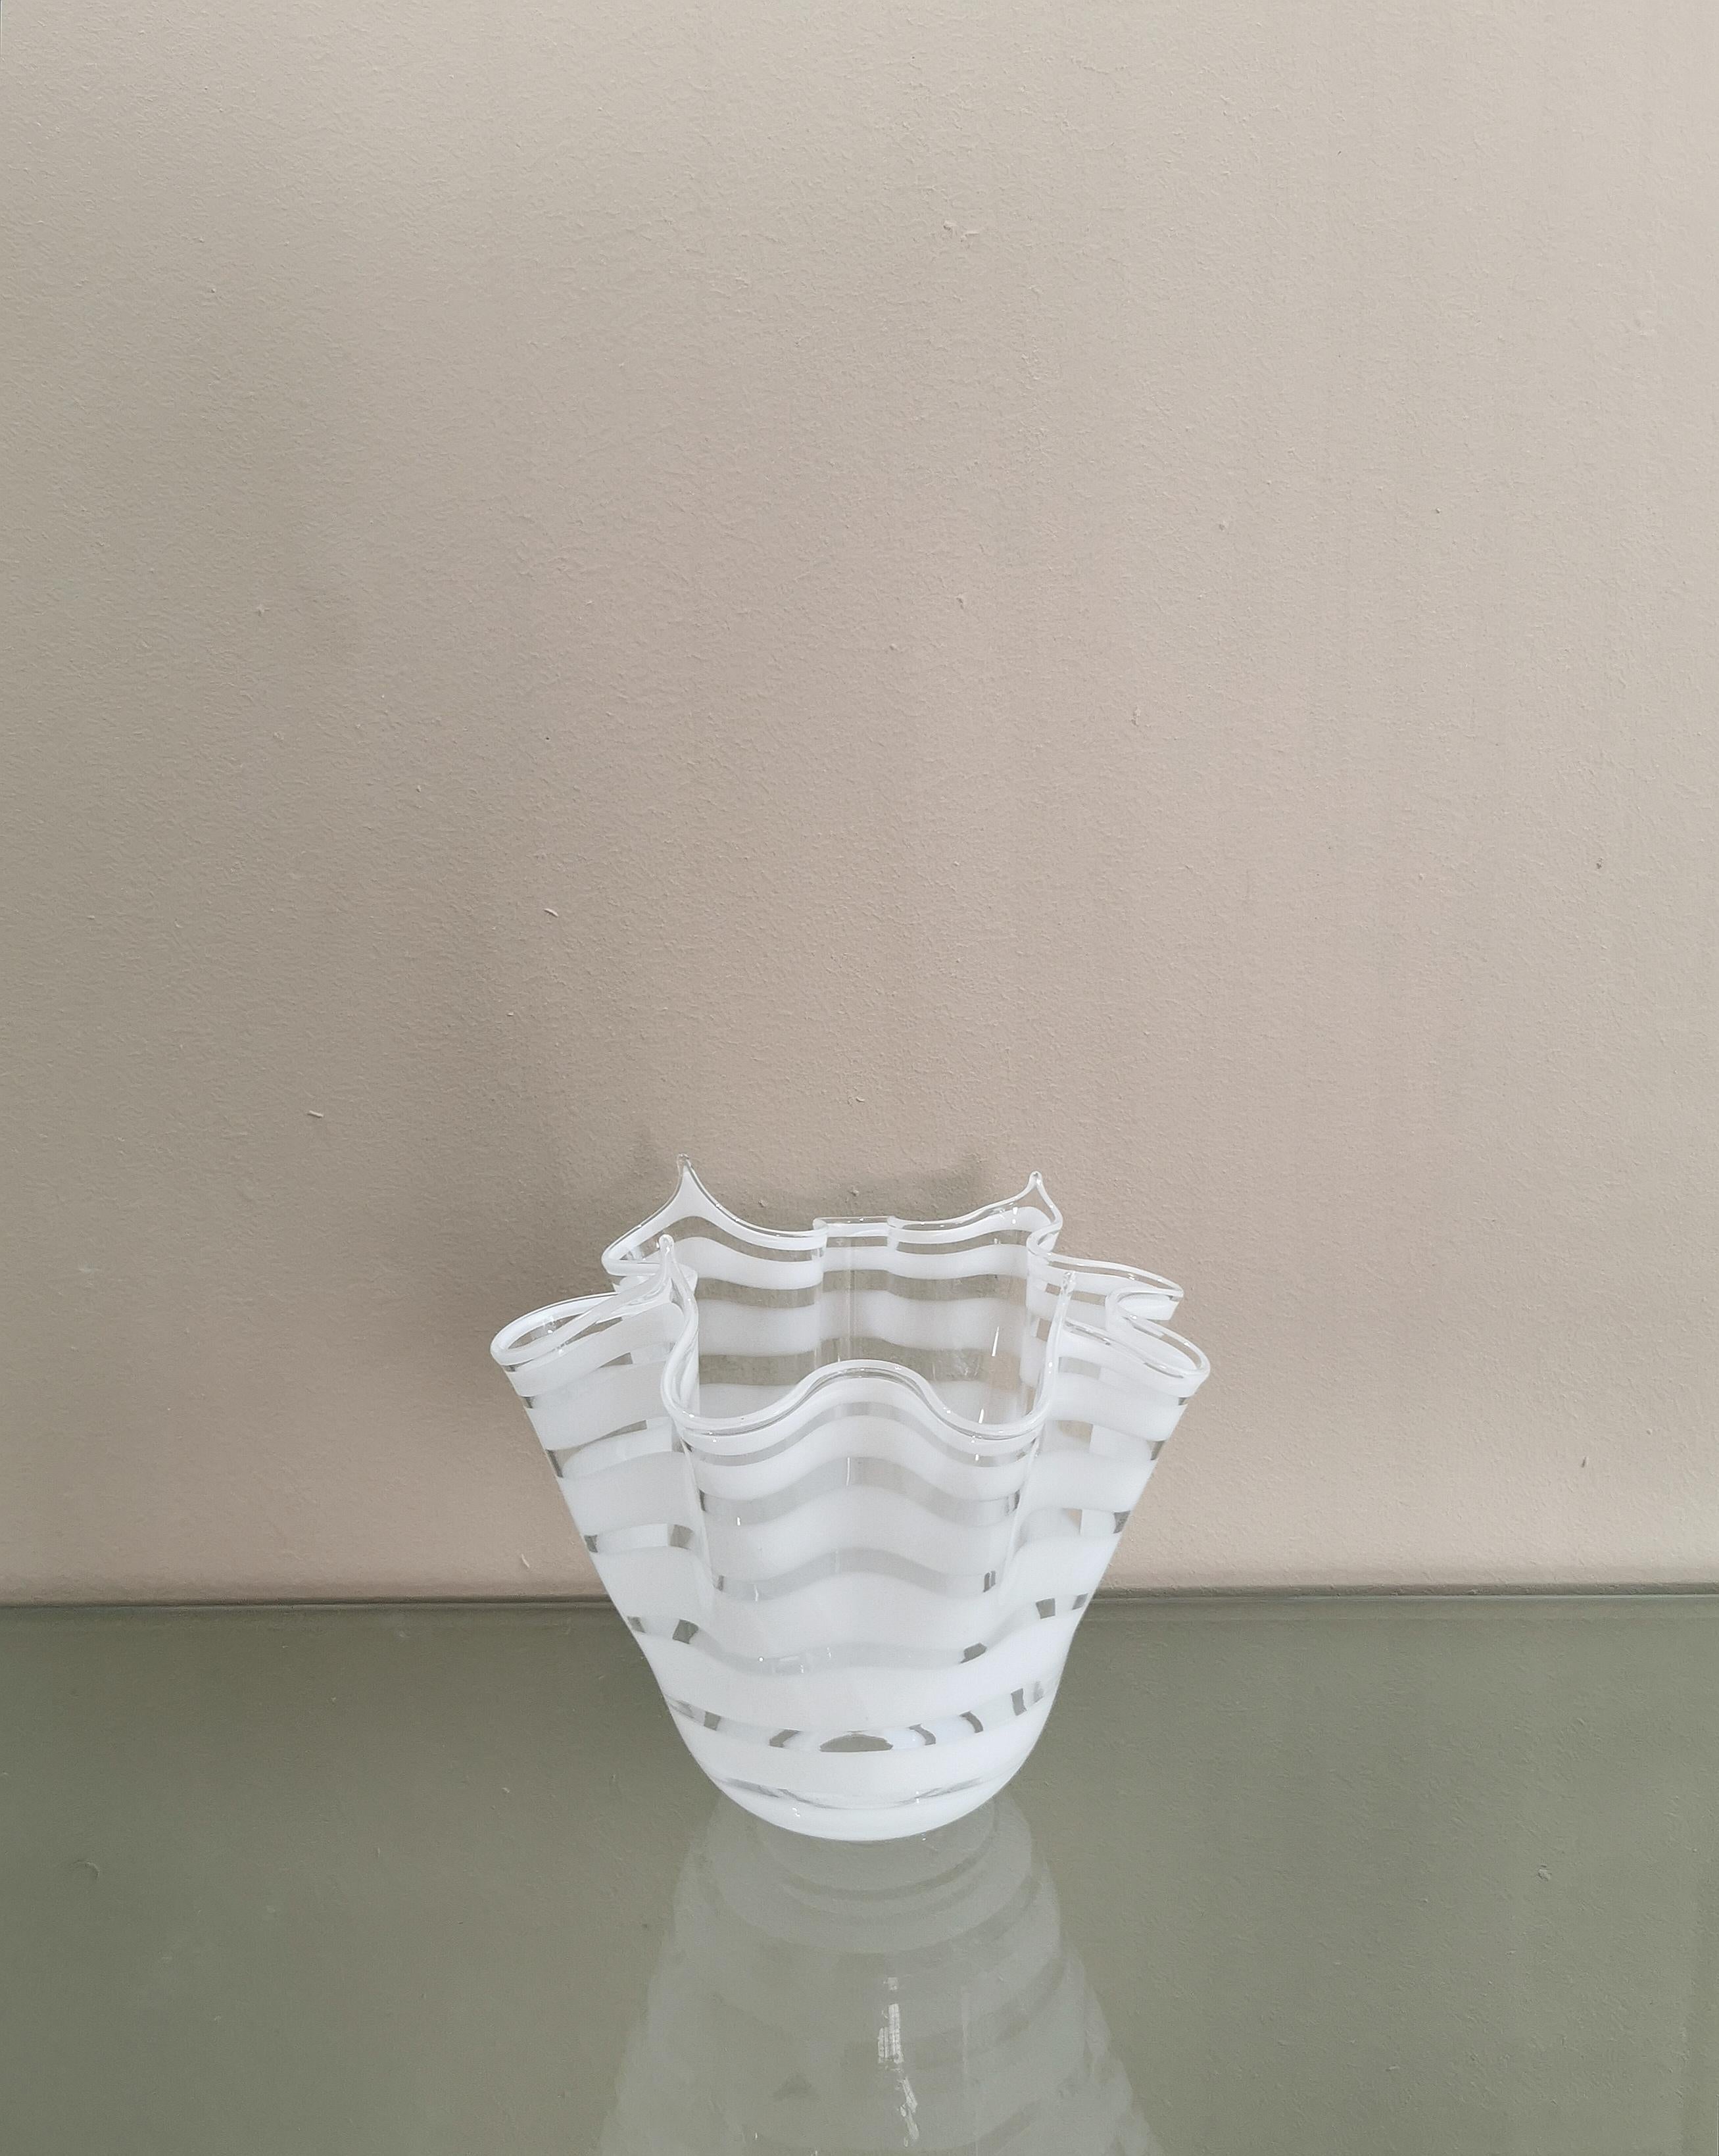 Vase designed in the style of Venini, produced in Italy in the 60's / 70's. The vase was made of white and transparent hand-blown Murano glass, with the particularity of having a wavy shape almost forming a handkerchief.